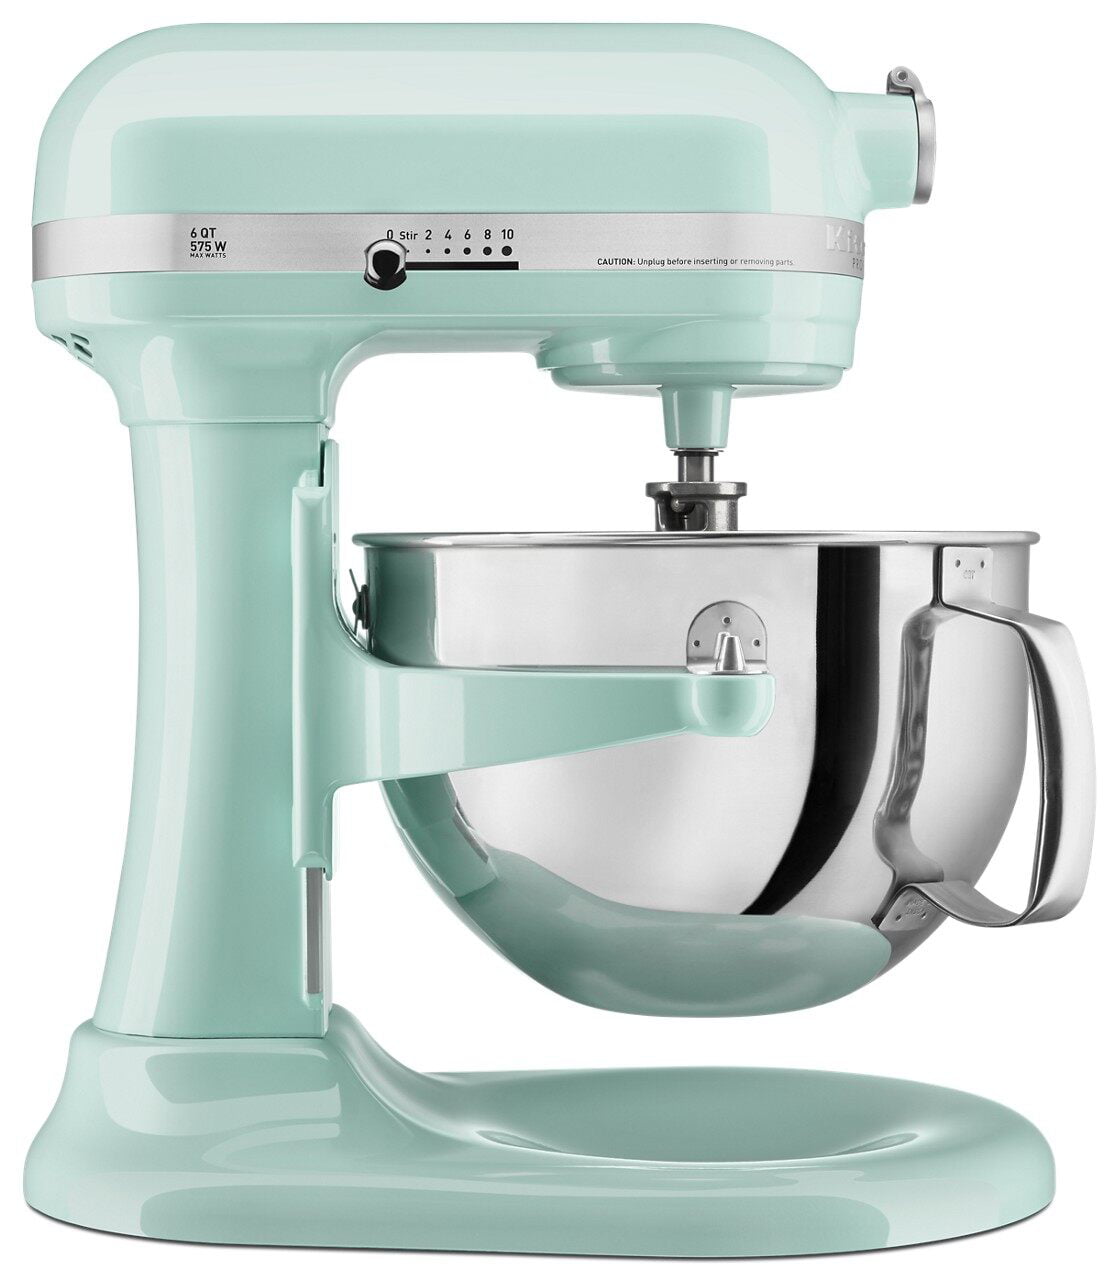 KOBWA Stand Mixer Dust-Proof Cover with Organizer Bag for Kitchenaid Mixer